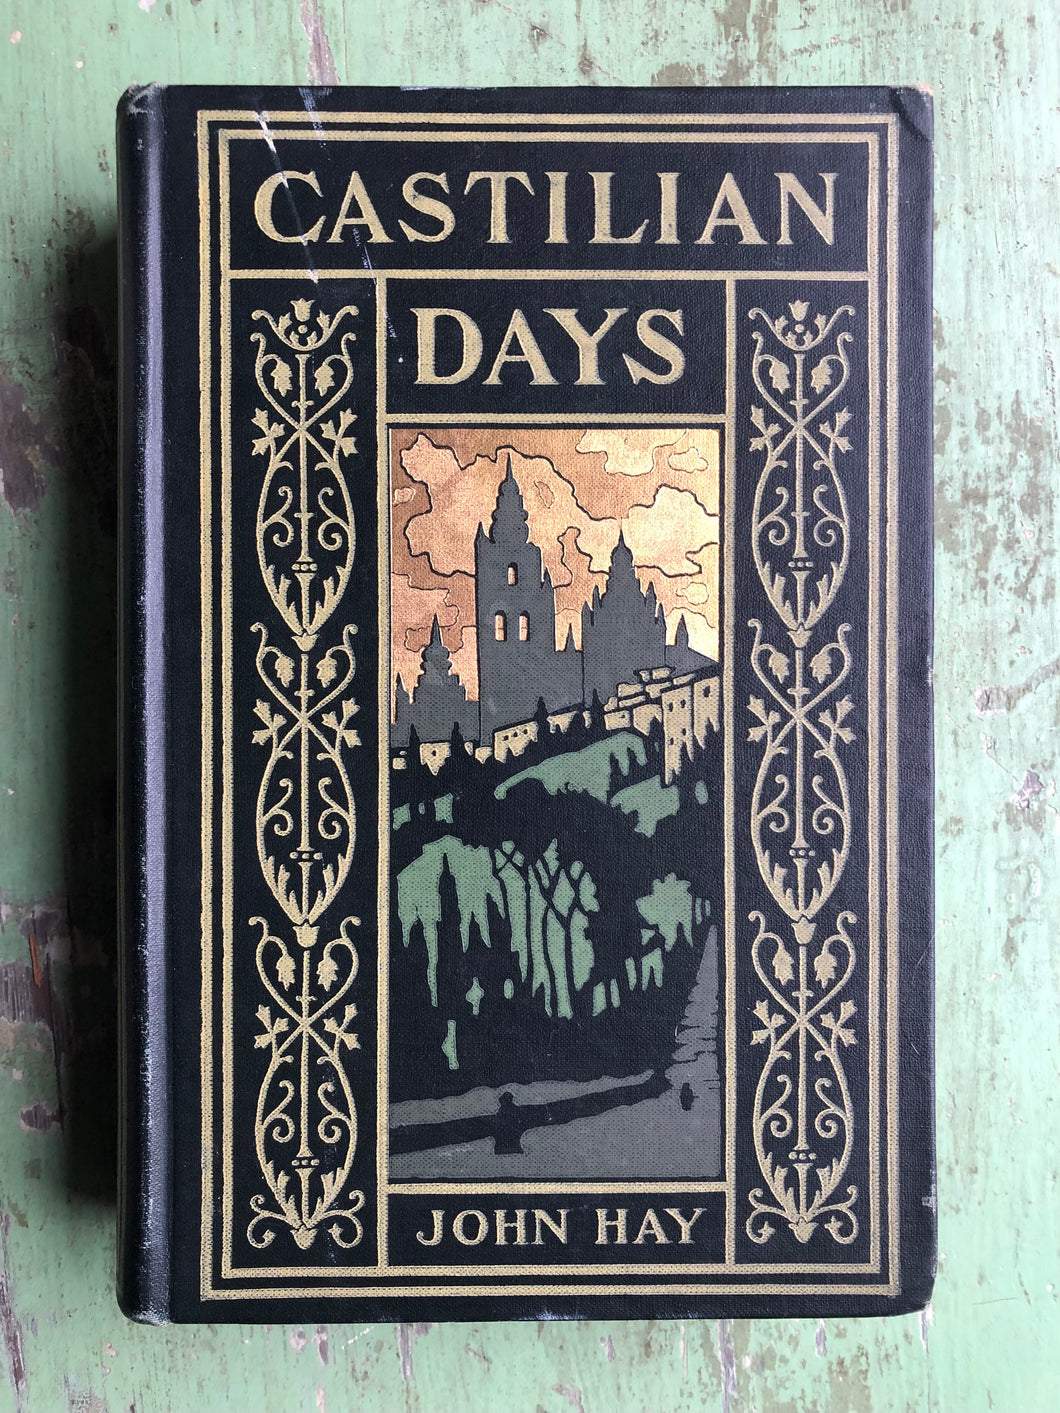 Castilian Days. by John Hay with illustrations by Joseph Pennell